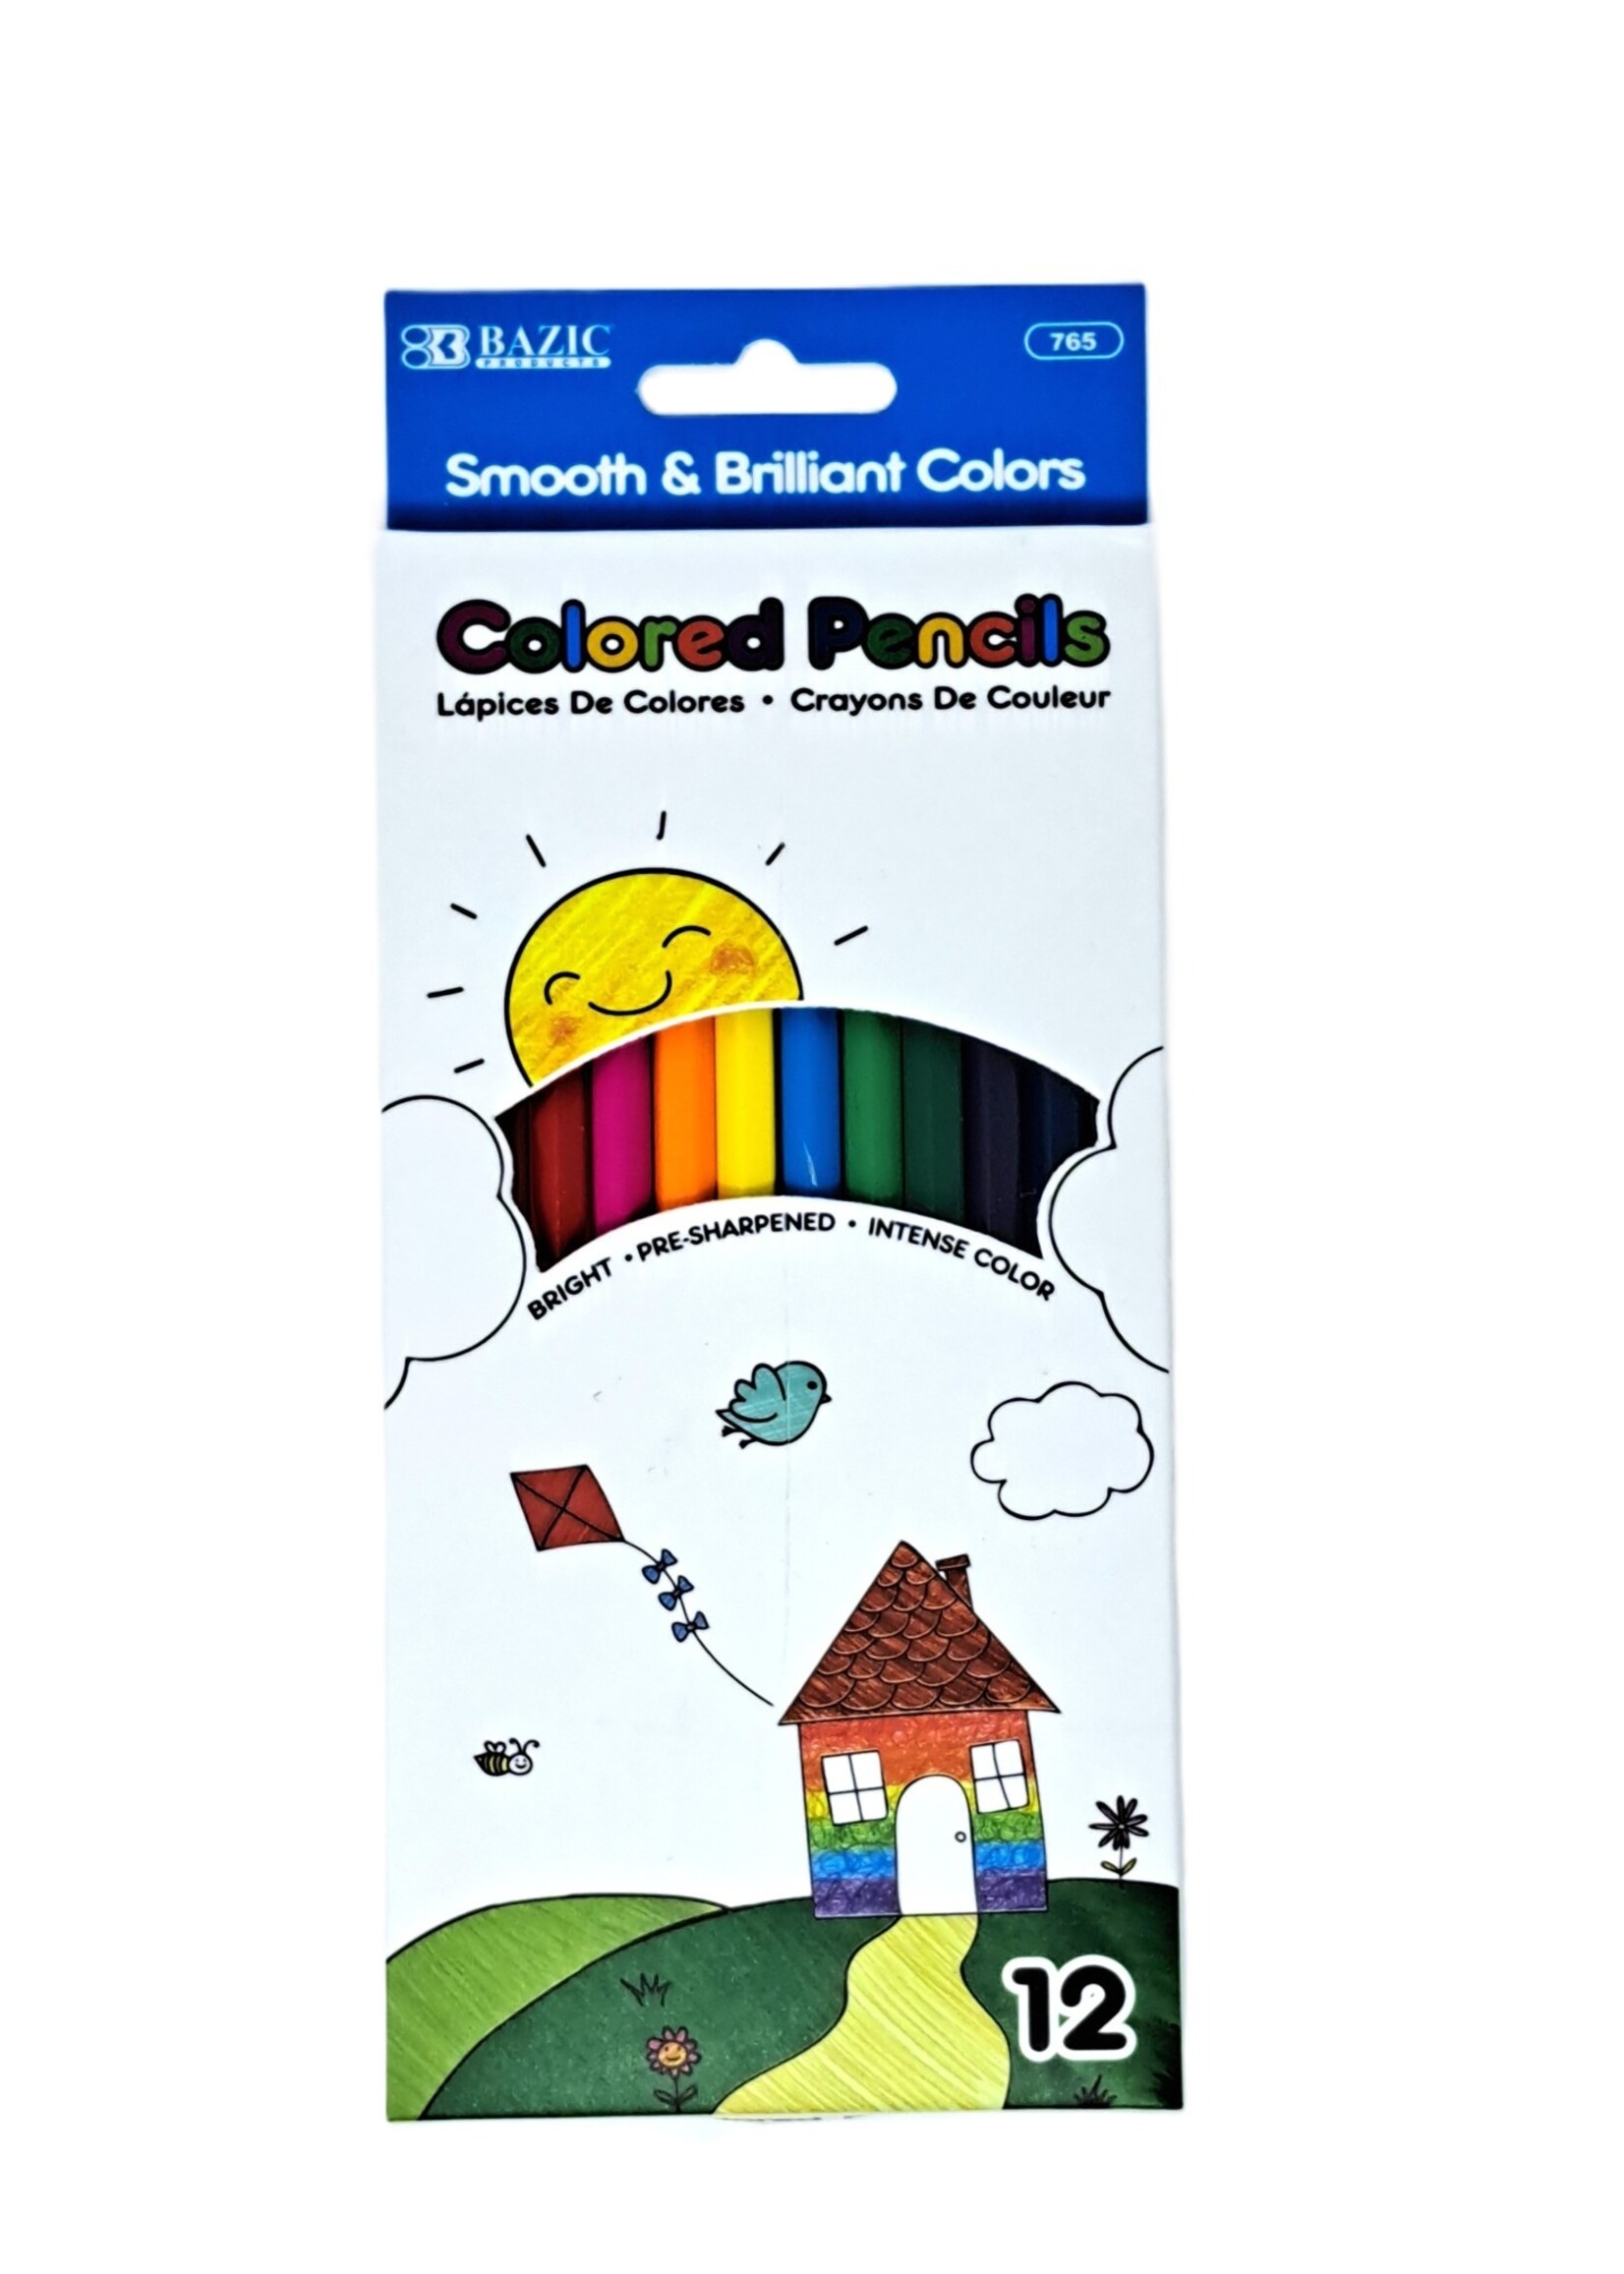 Bazic Colored Pencils 12 pack